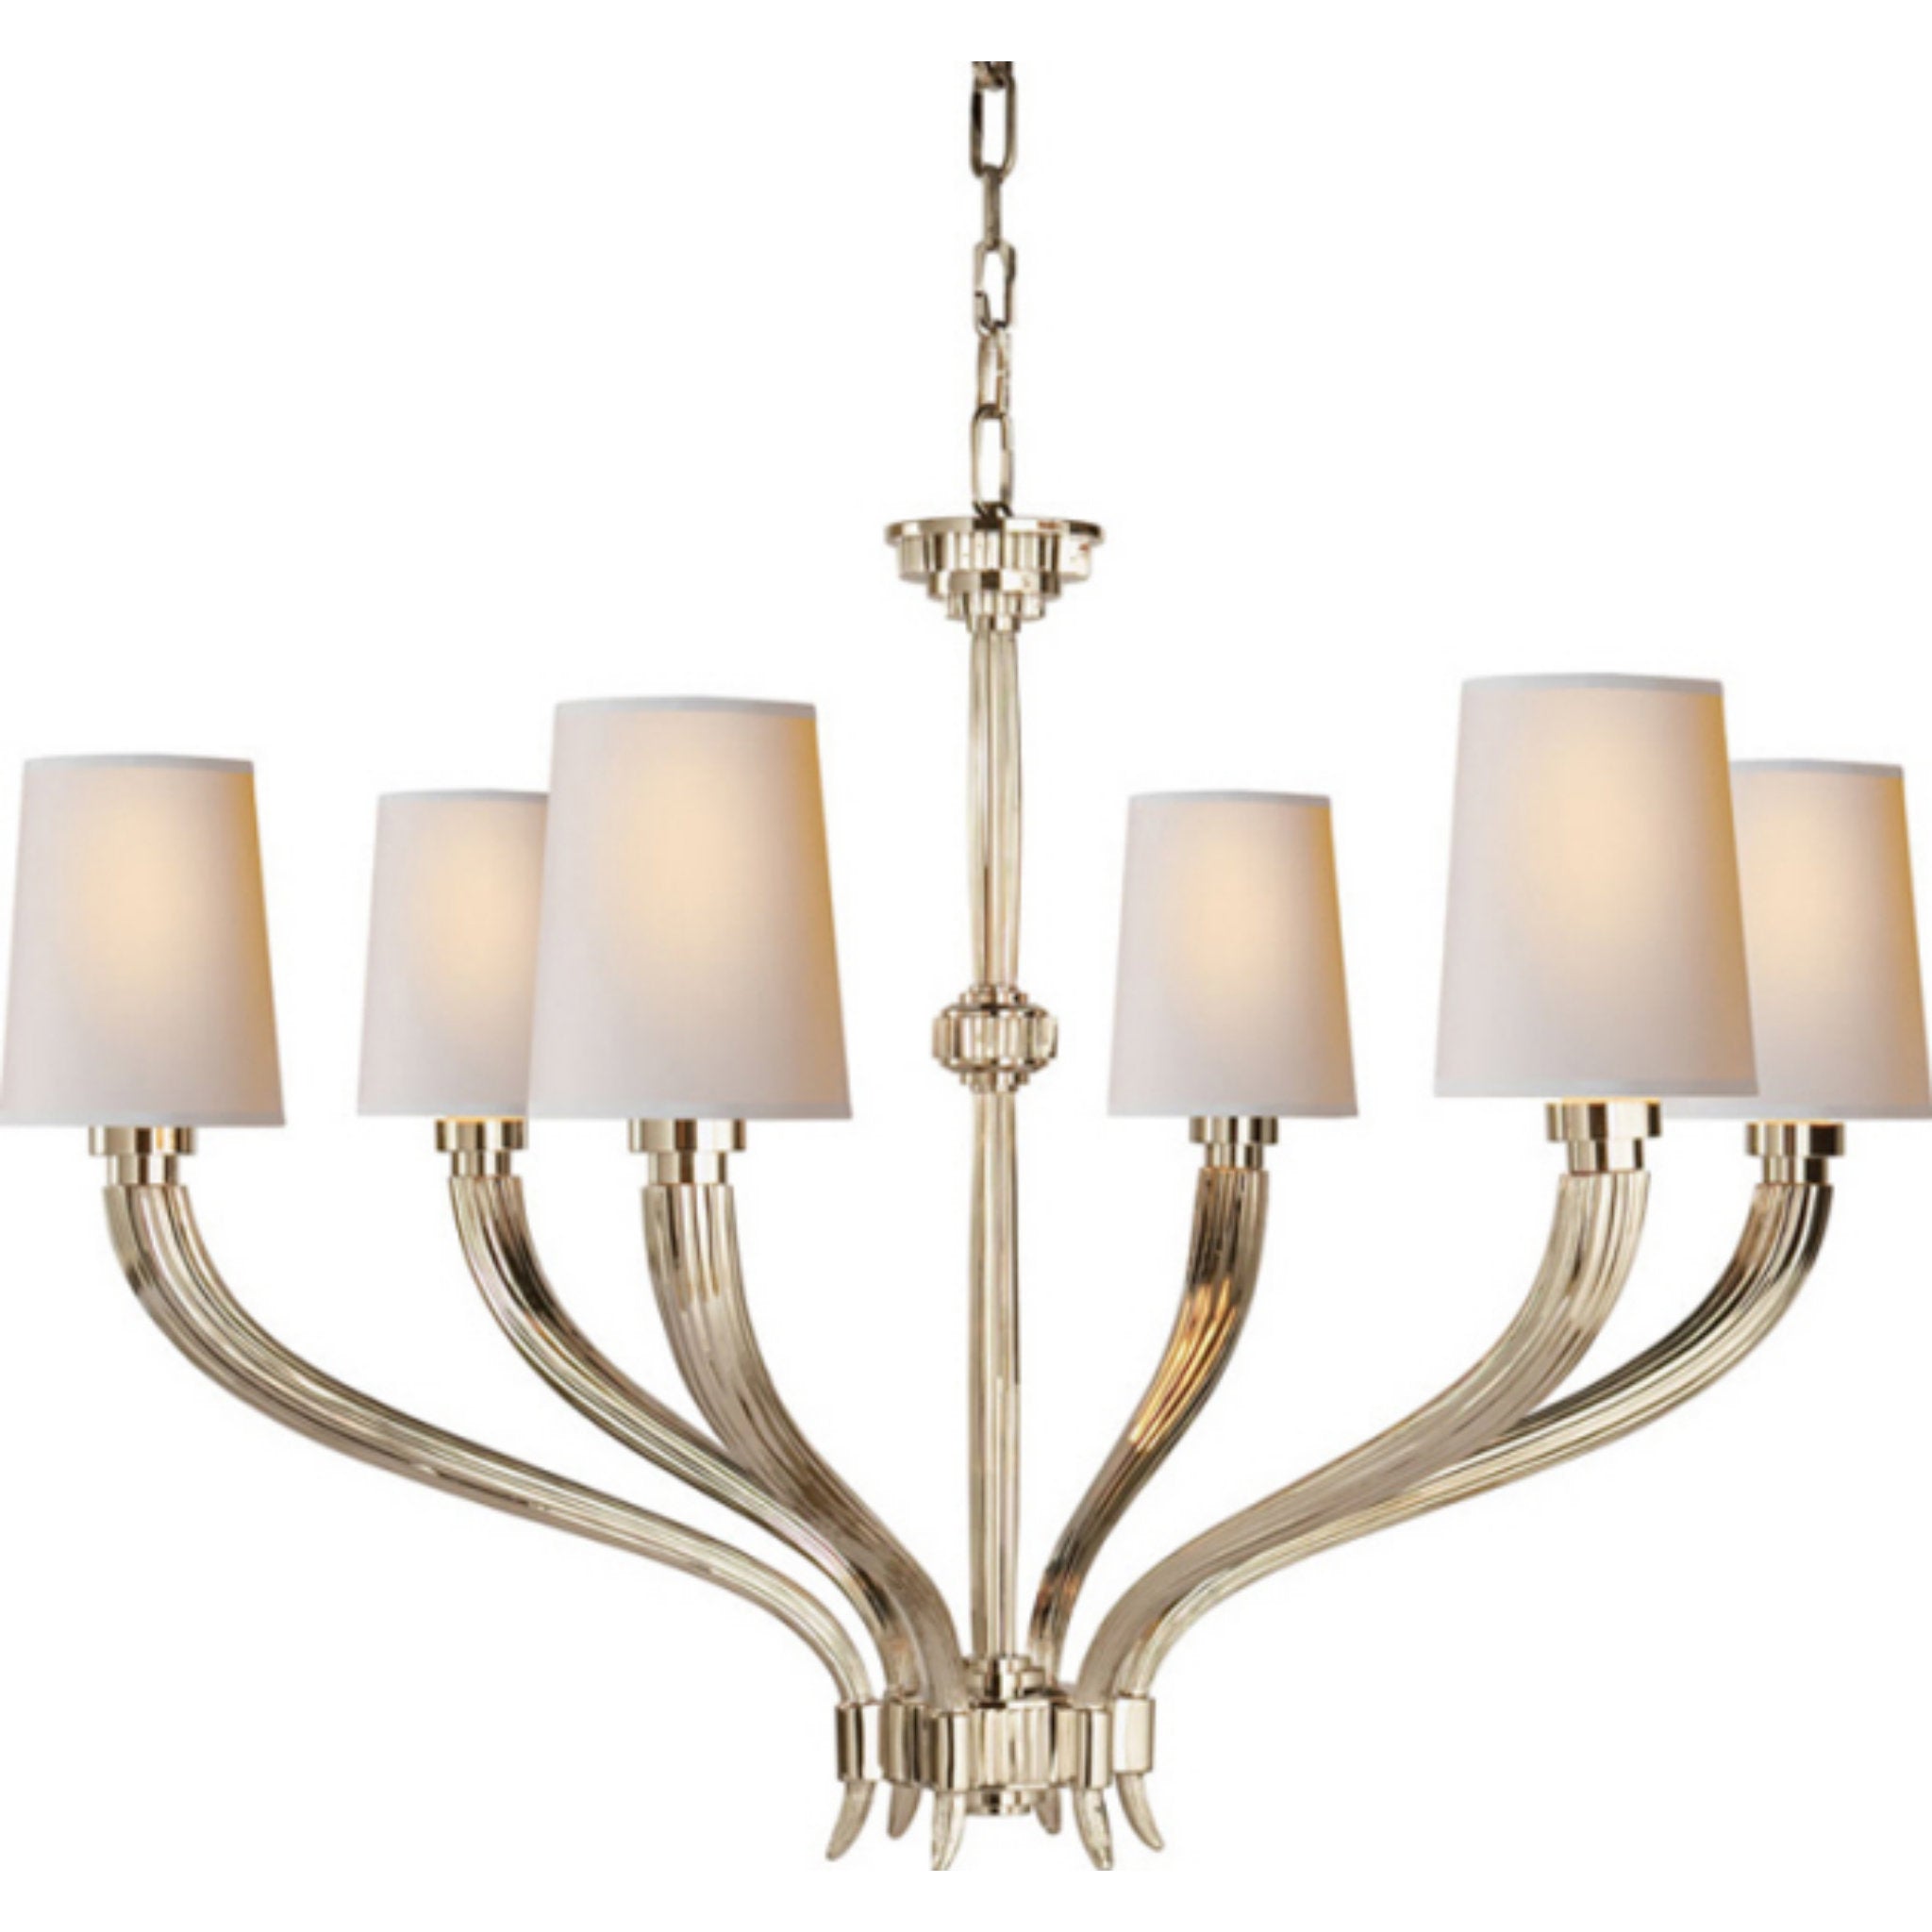 Chapman & Myers Ruhlmann Large Chandelier in Polished Nickel with Natural Paper Shades